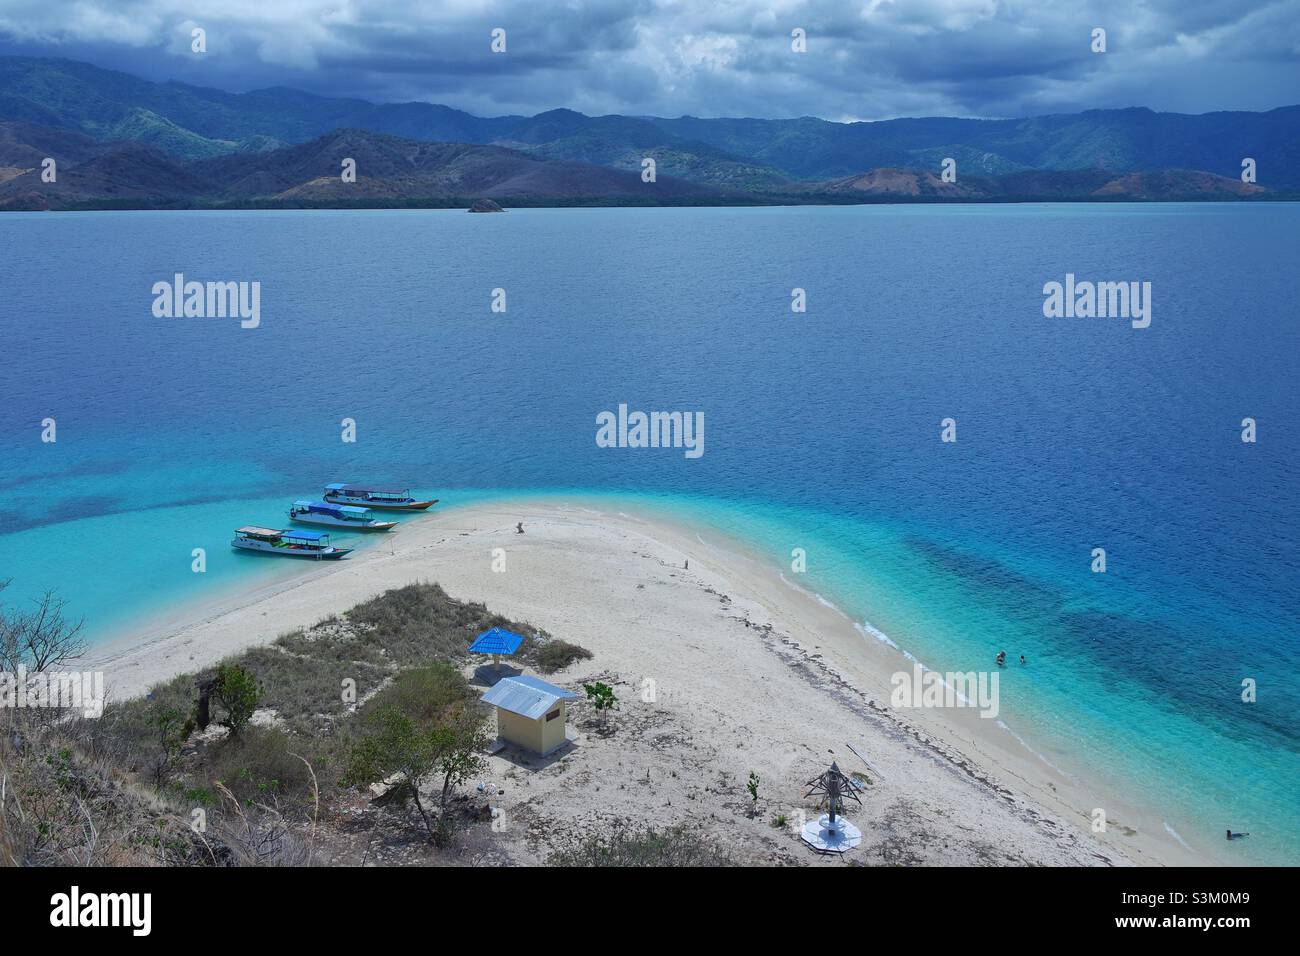 17 Islands or Pulau Tujuhbelas is a collection of actually more than twenty islets forming a marine park called ‘Taman Wisata Alam Laut 17 Pulau Riung’ on Flores’ northern coast. Stock Photo